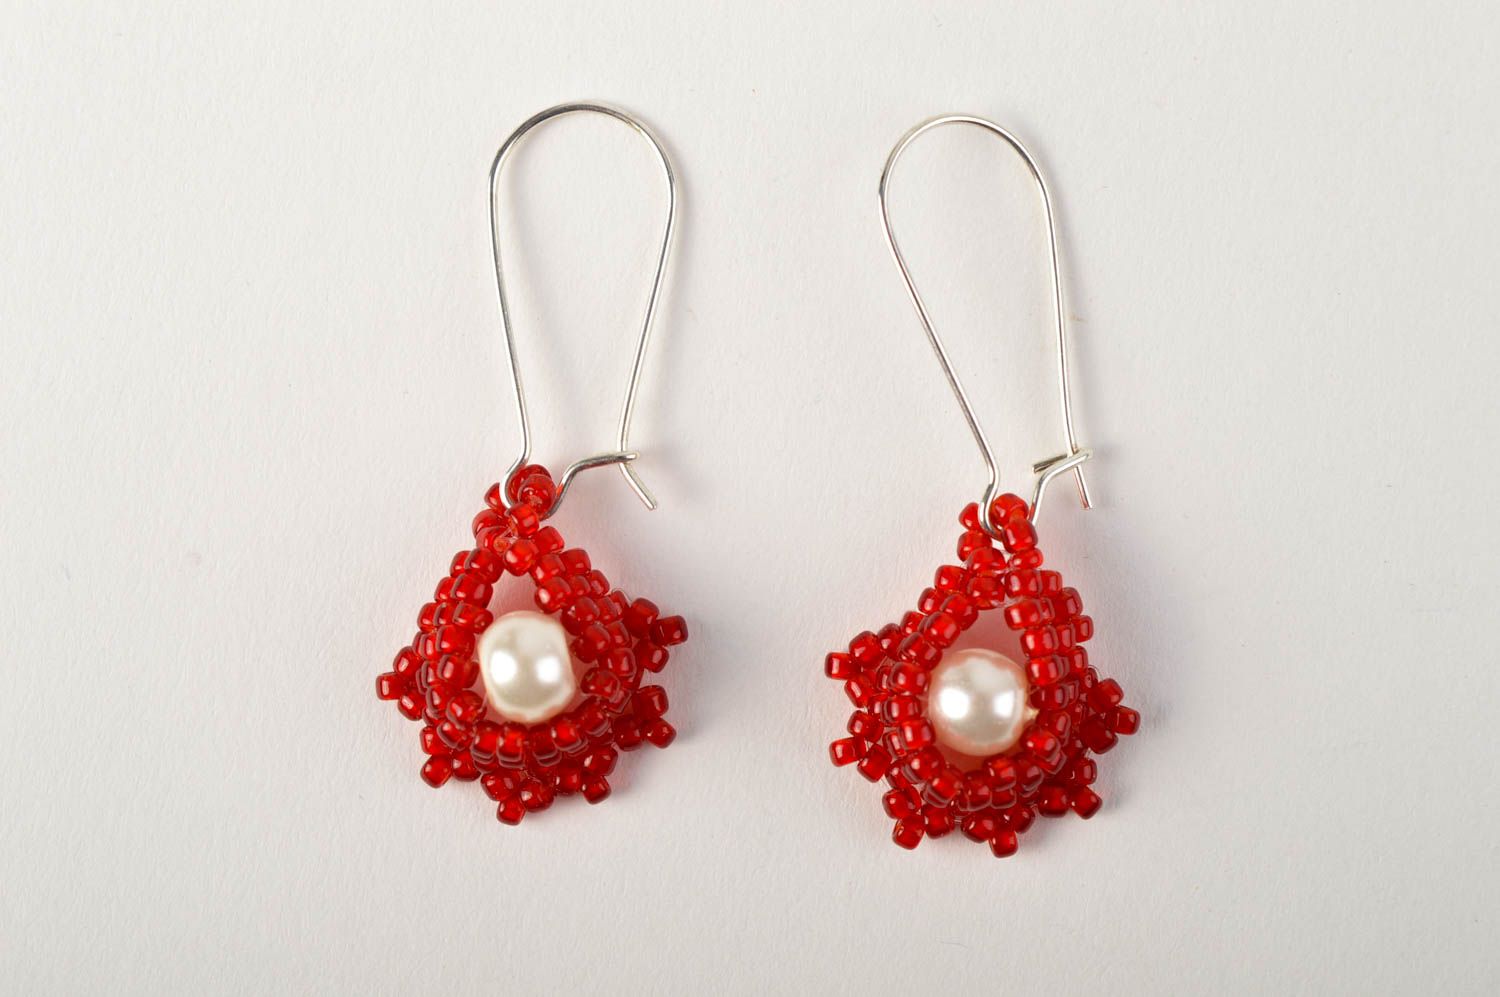 Handmade festive jewelry unusual cute accessory red earrings gift for her photo 3